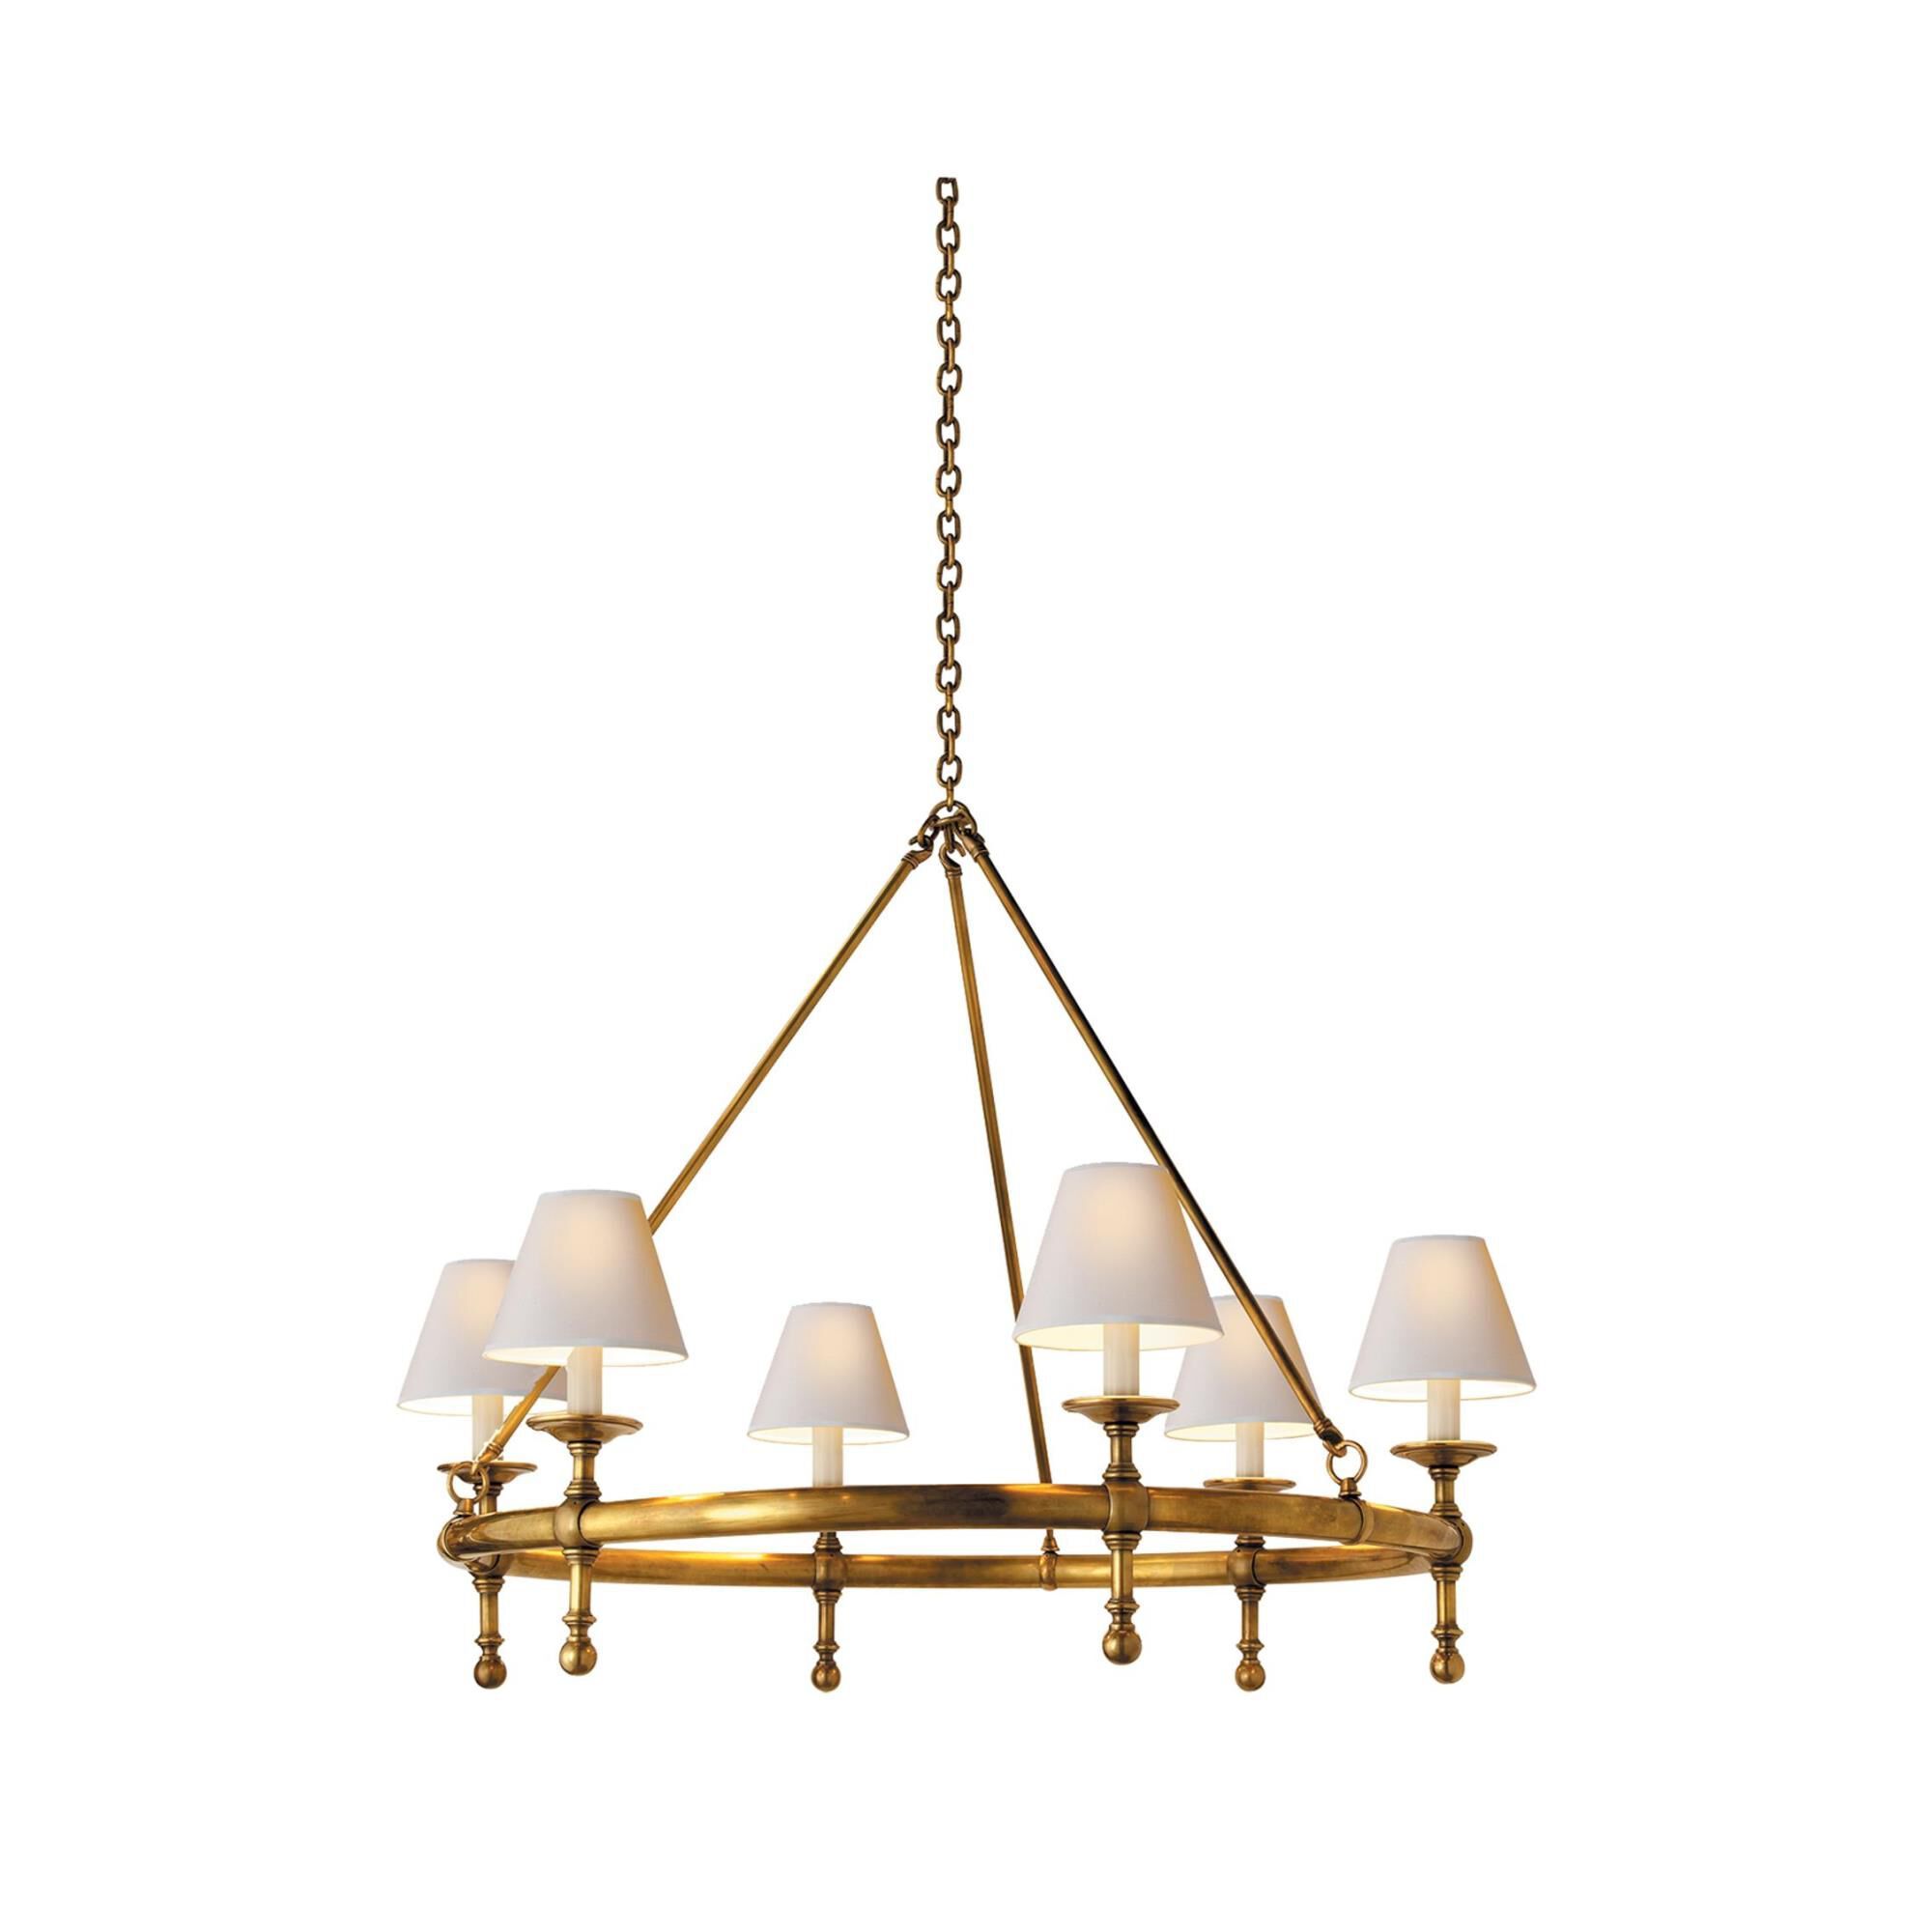 E. F. Chapman Classic 33 Inch 6 Light Chandelier by Visual Comfort and Co. | Capitol Lighting 1800lighting.com